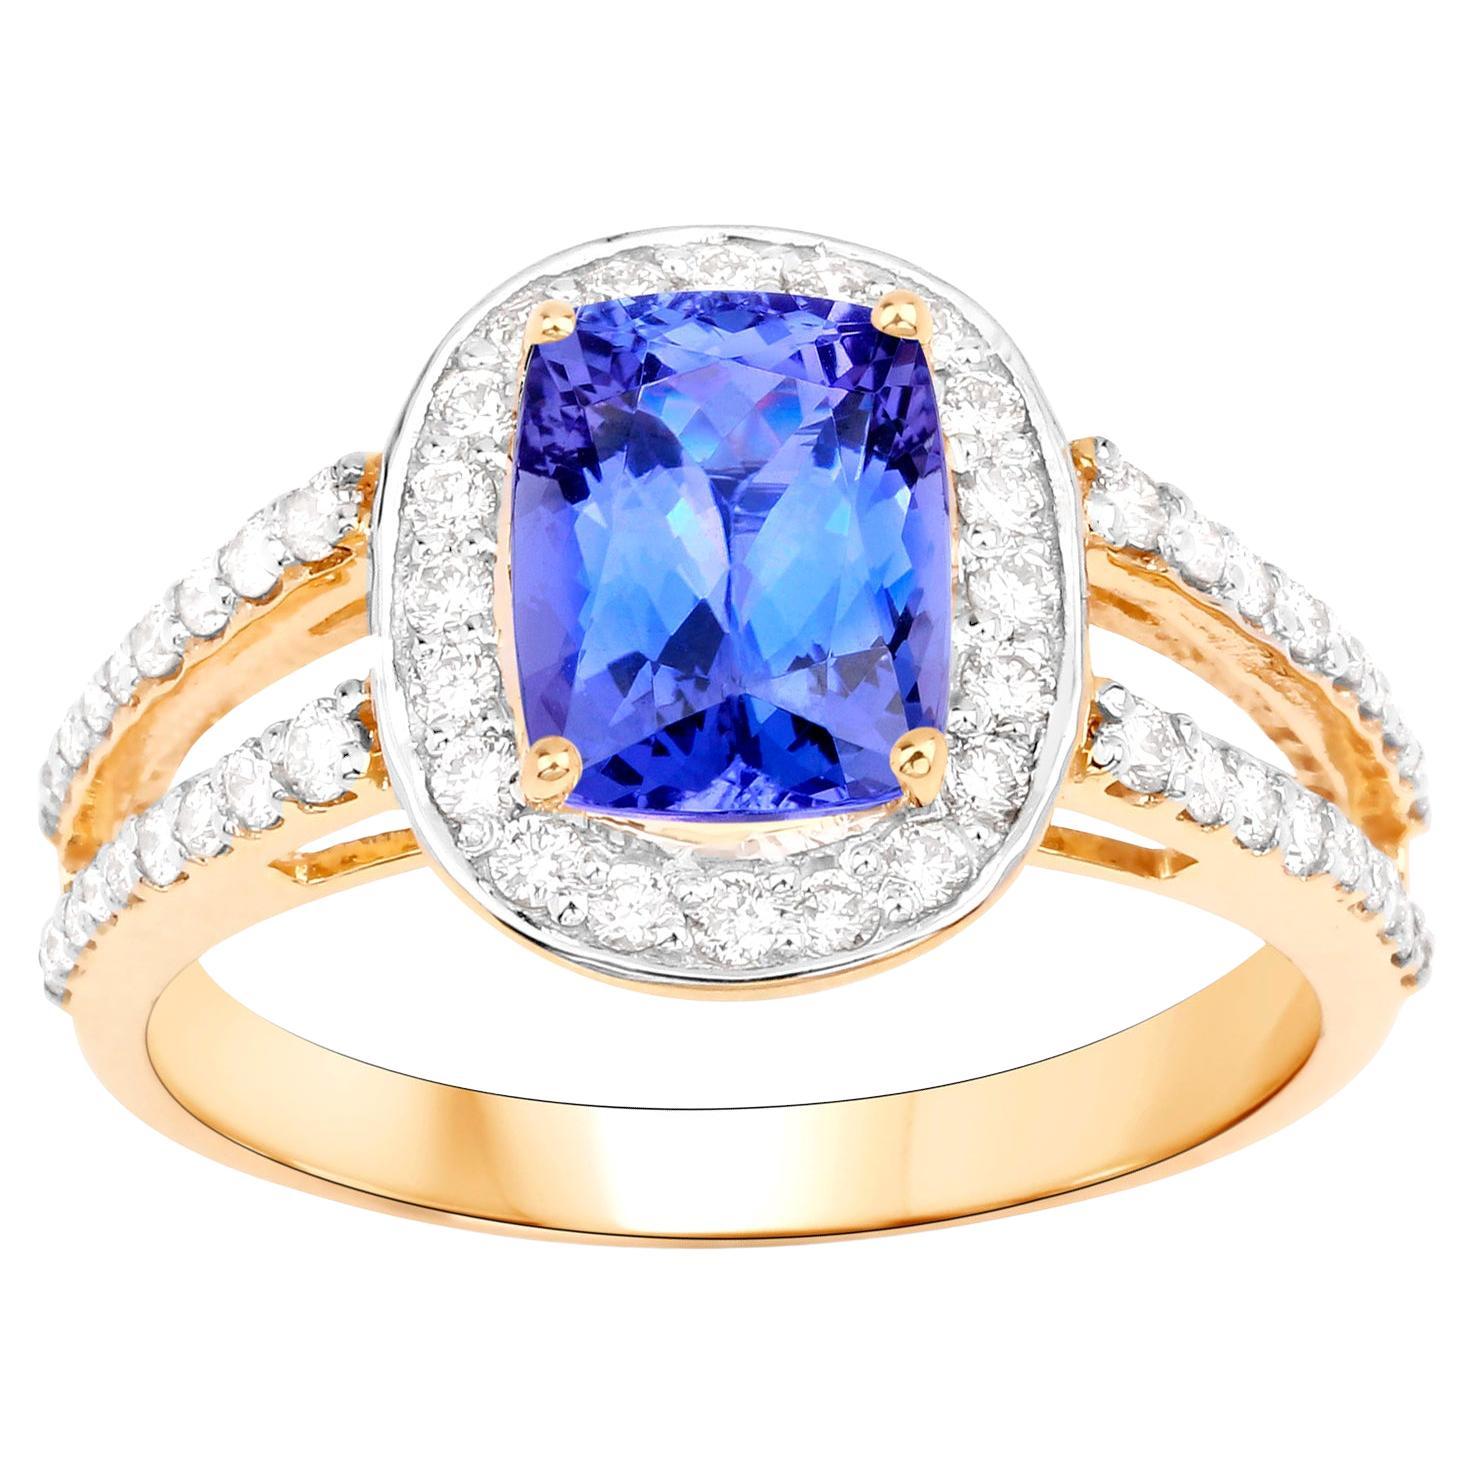 Tanzanite Ring With Diamonds 1.64 Carats 14K Yellow Gold For Sale